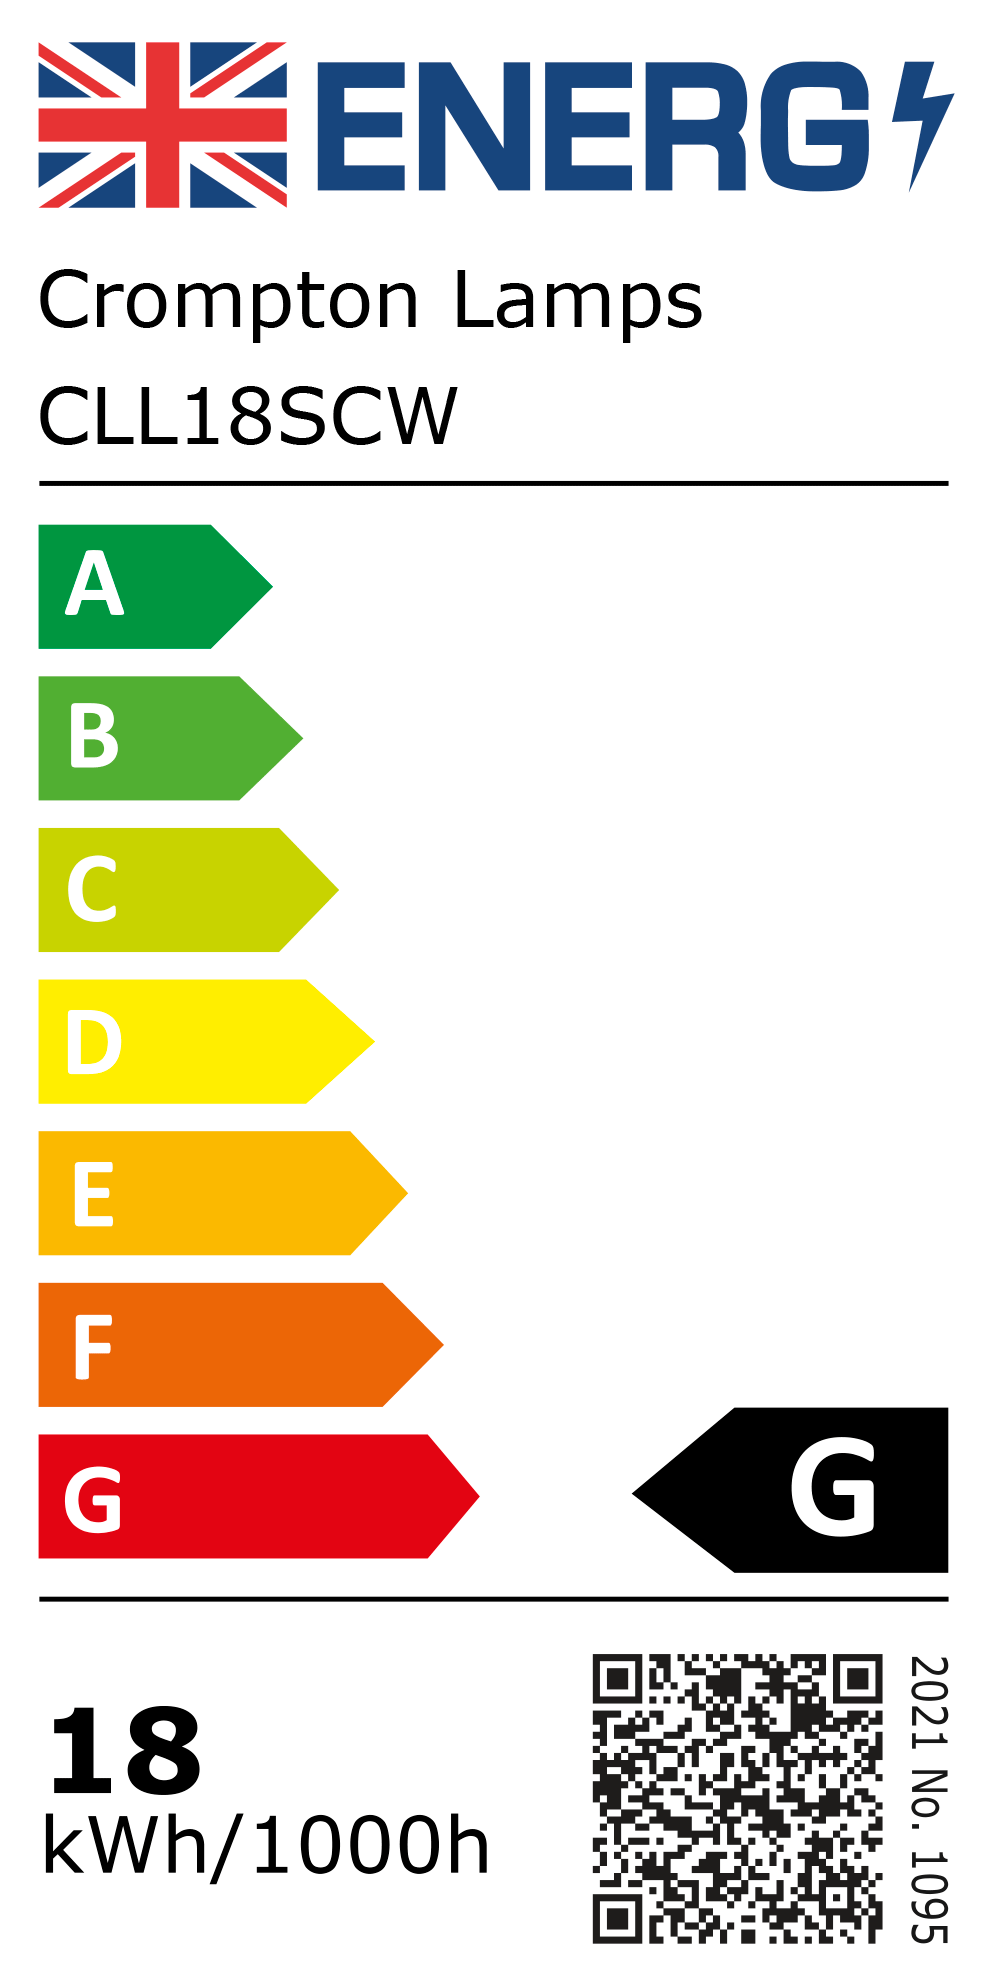 New 2021 Energy Rating Label: Stock Code CLL18SCW